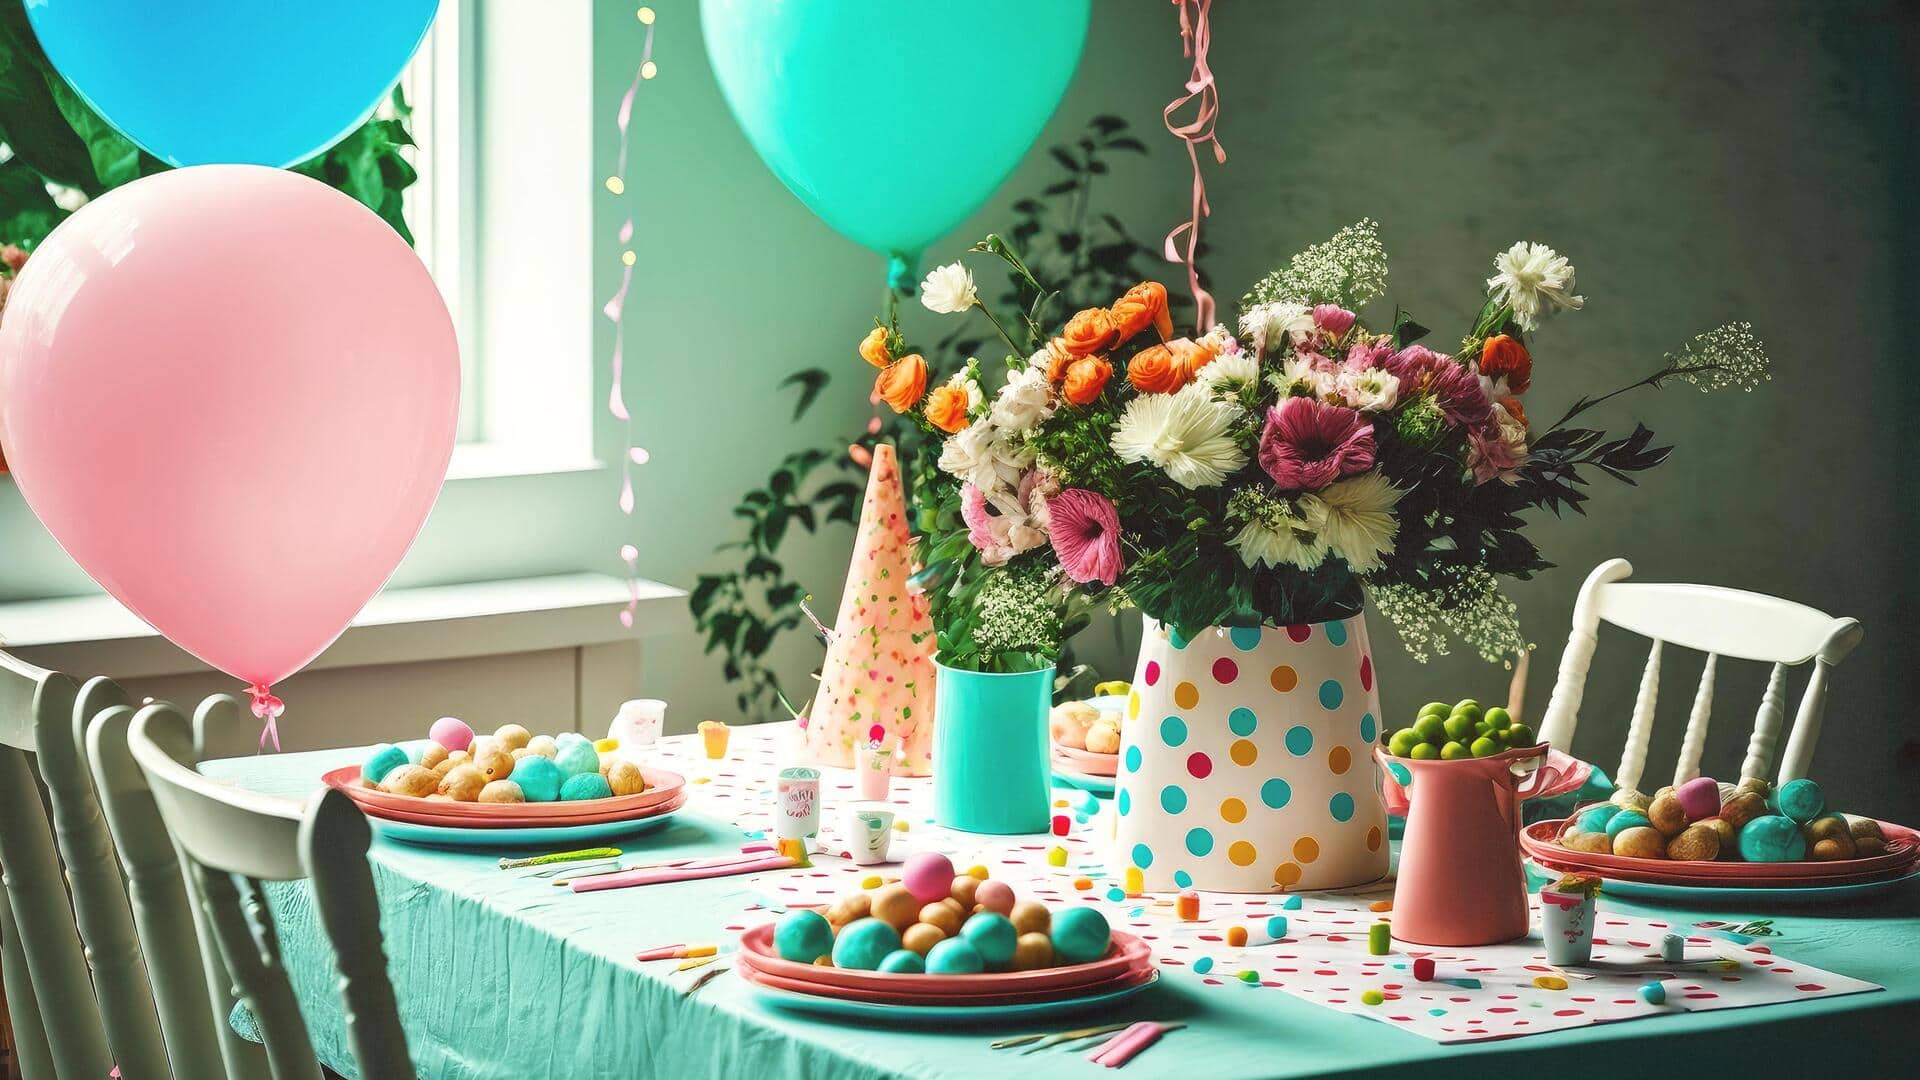 Throwing birthday party? 5 ways to decorate your house